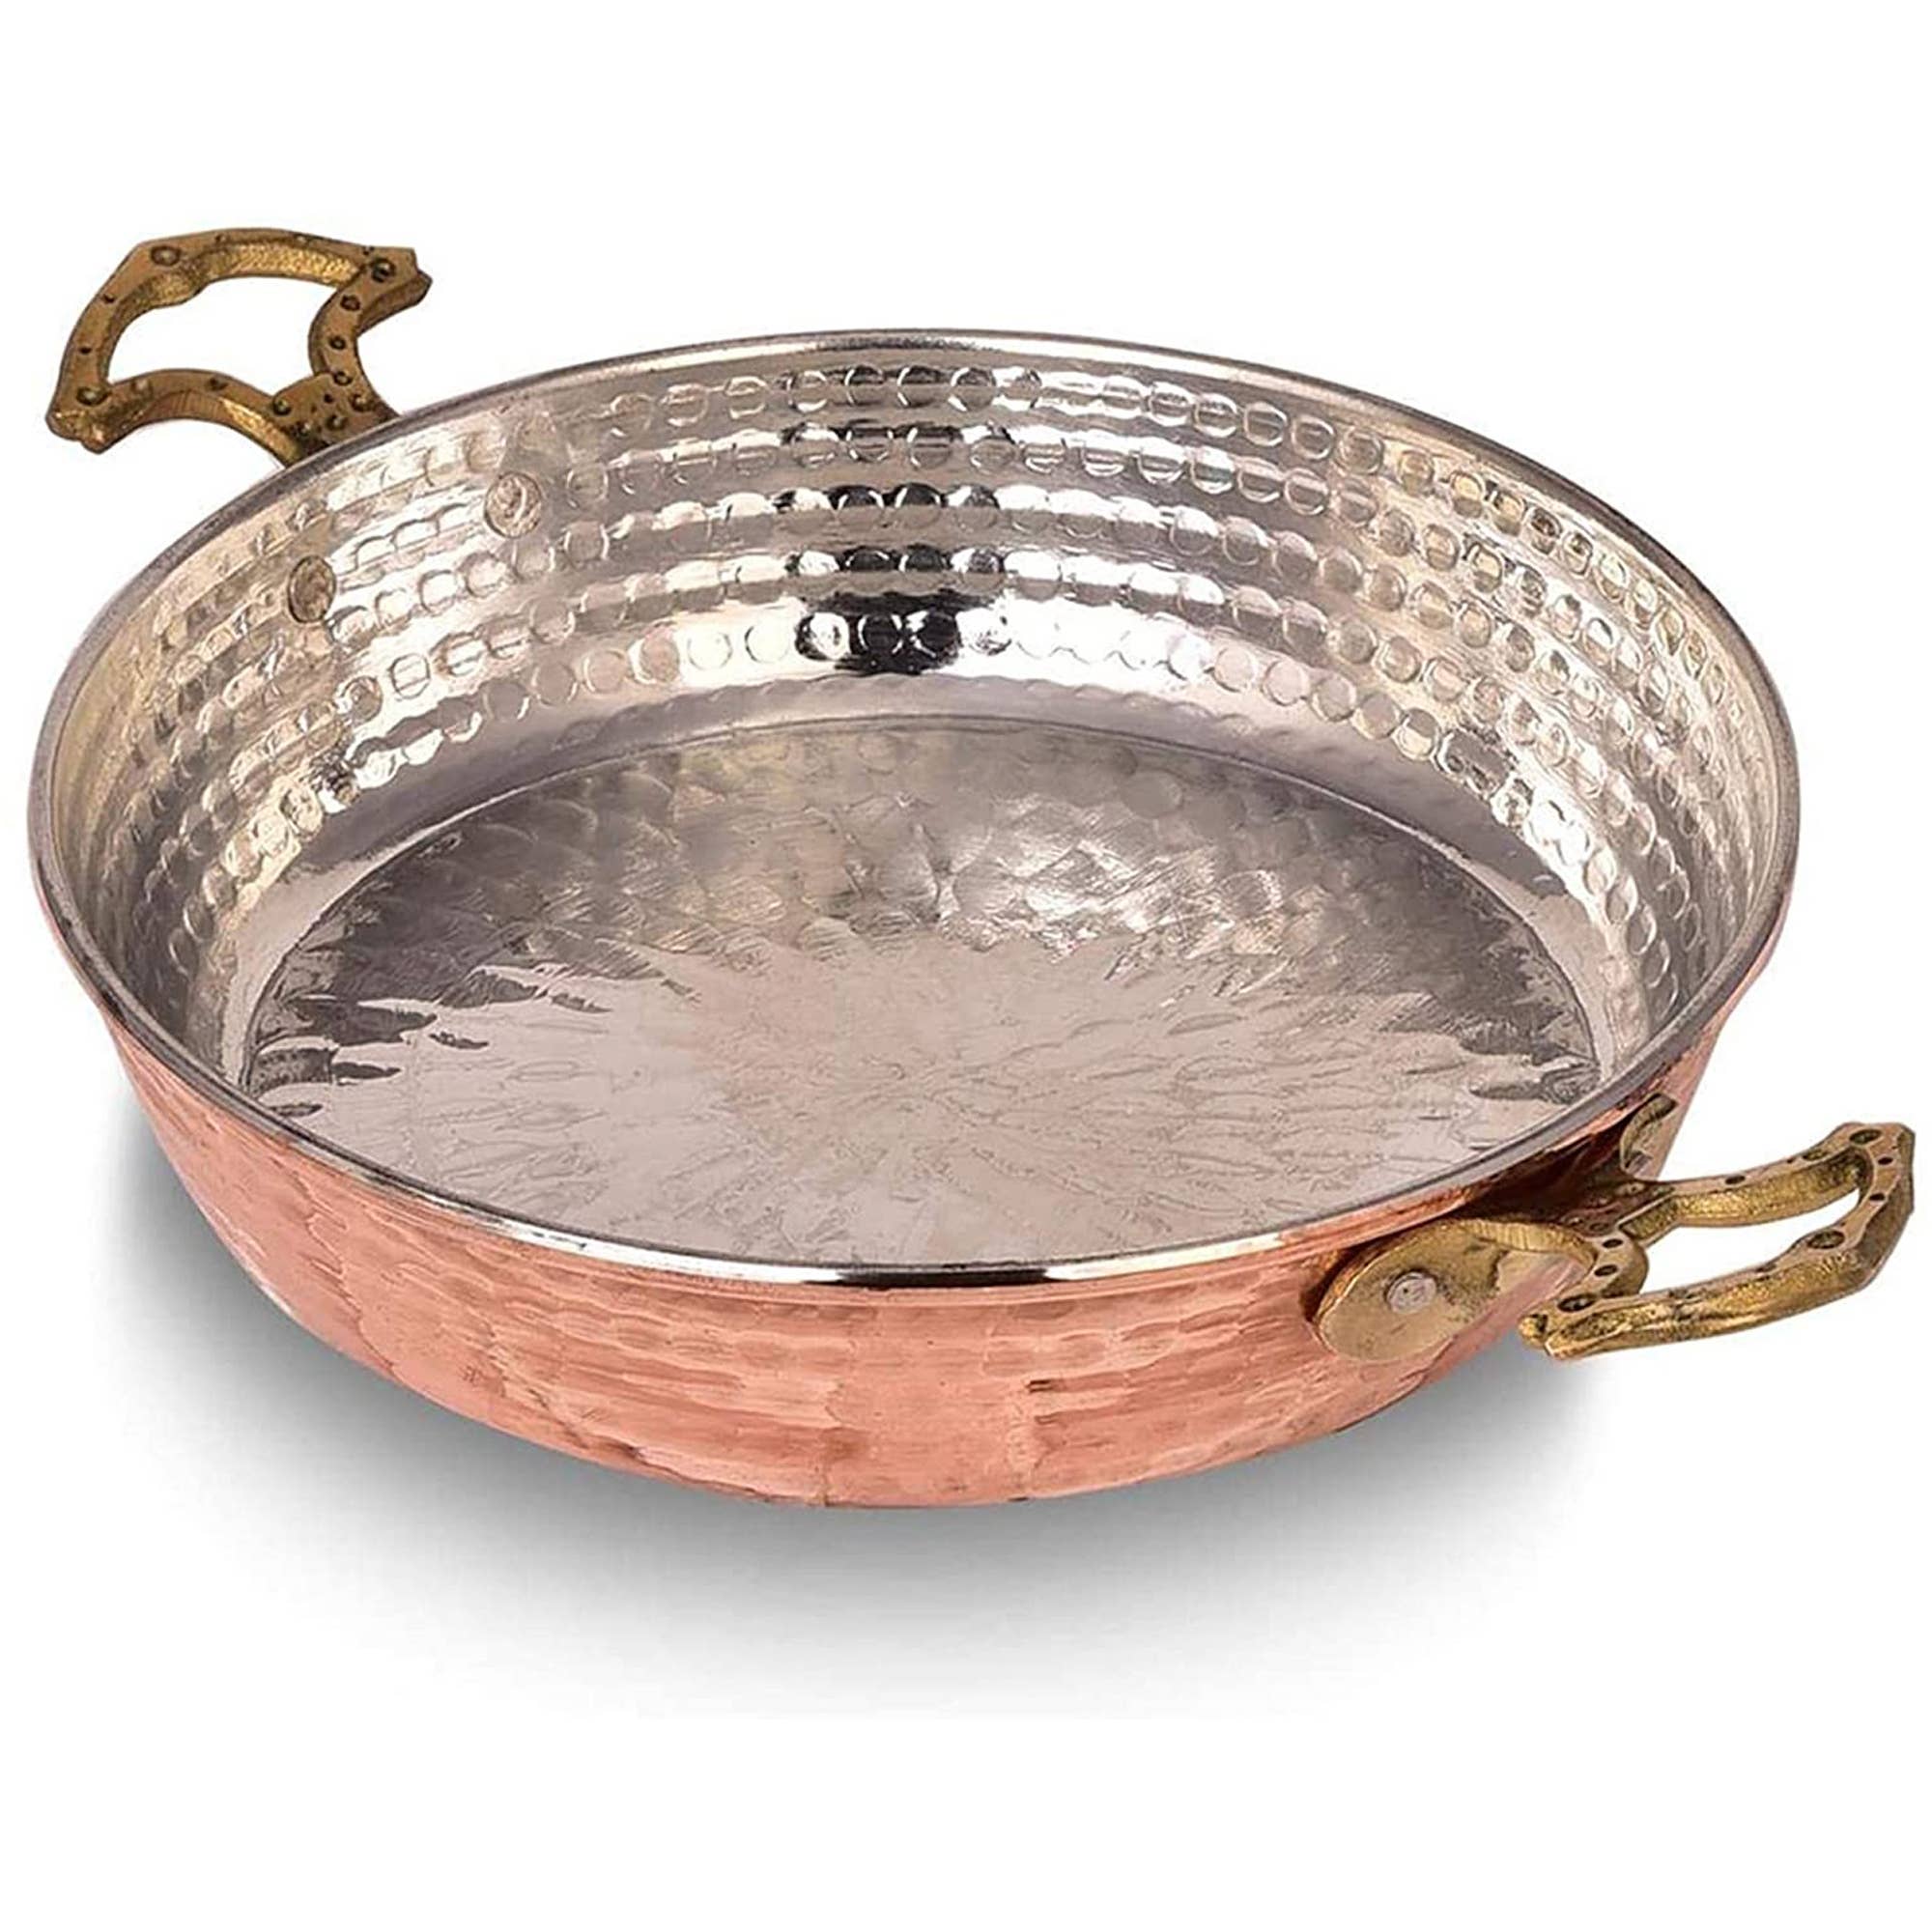 Brass Kadhai Pan With Handle Hammer Design Inside Tin Plating For Cooking .